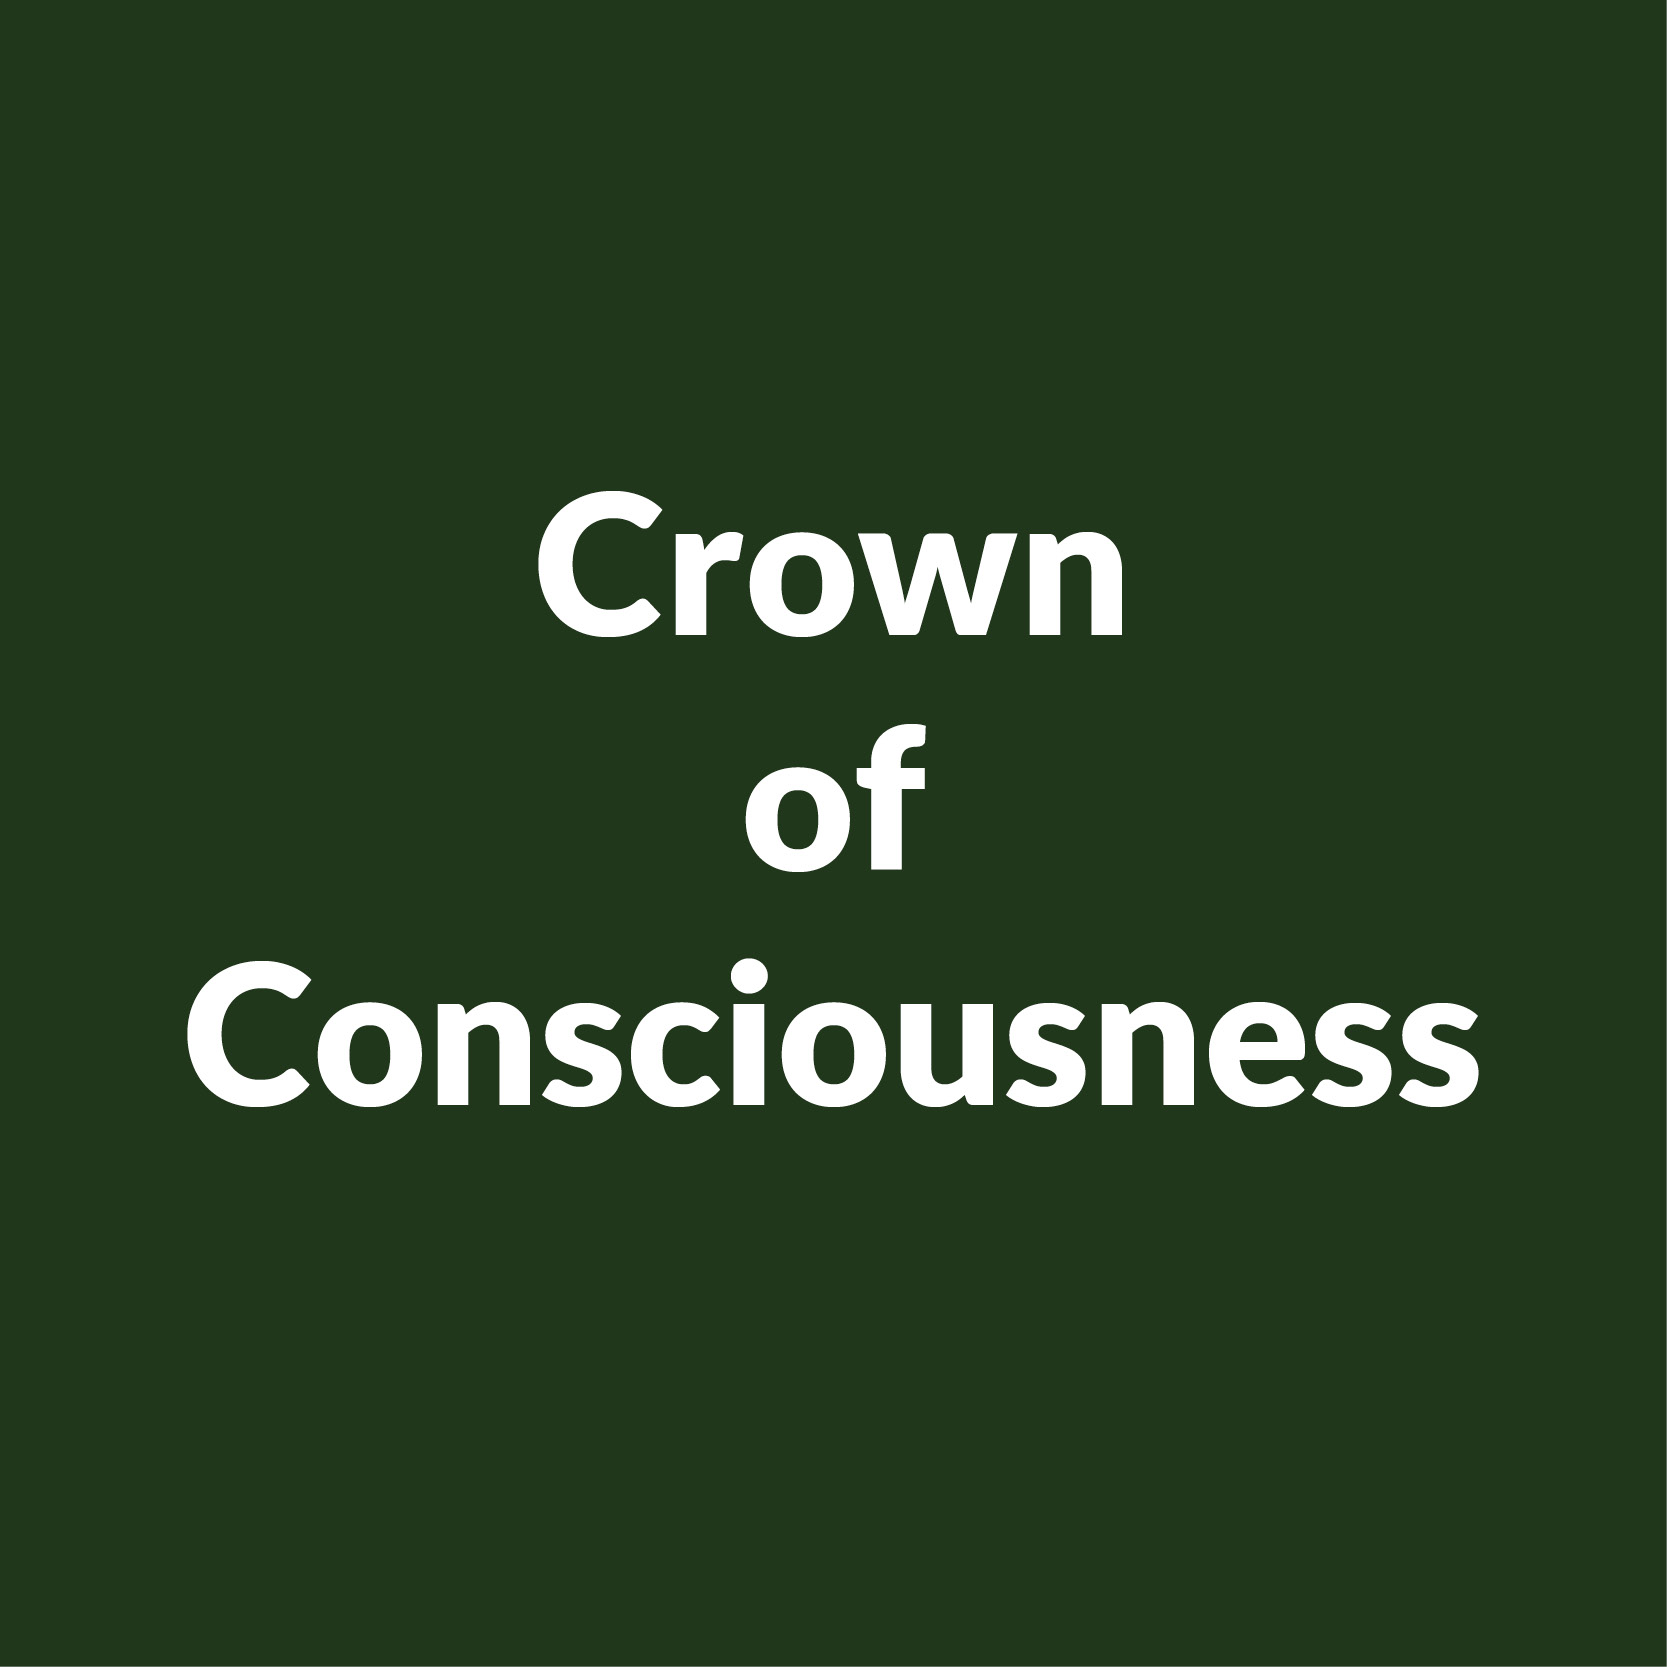 Crown of Consciousness